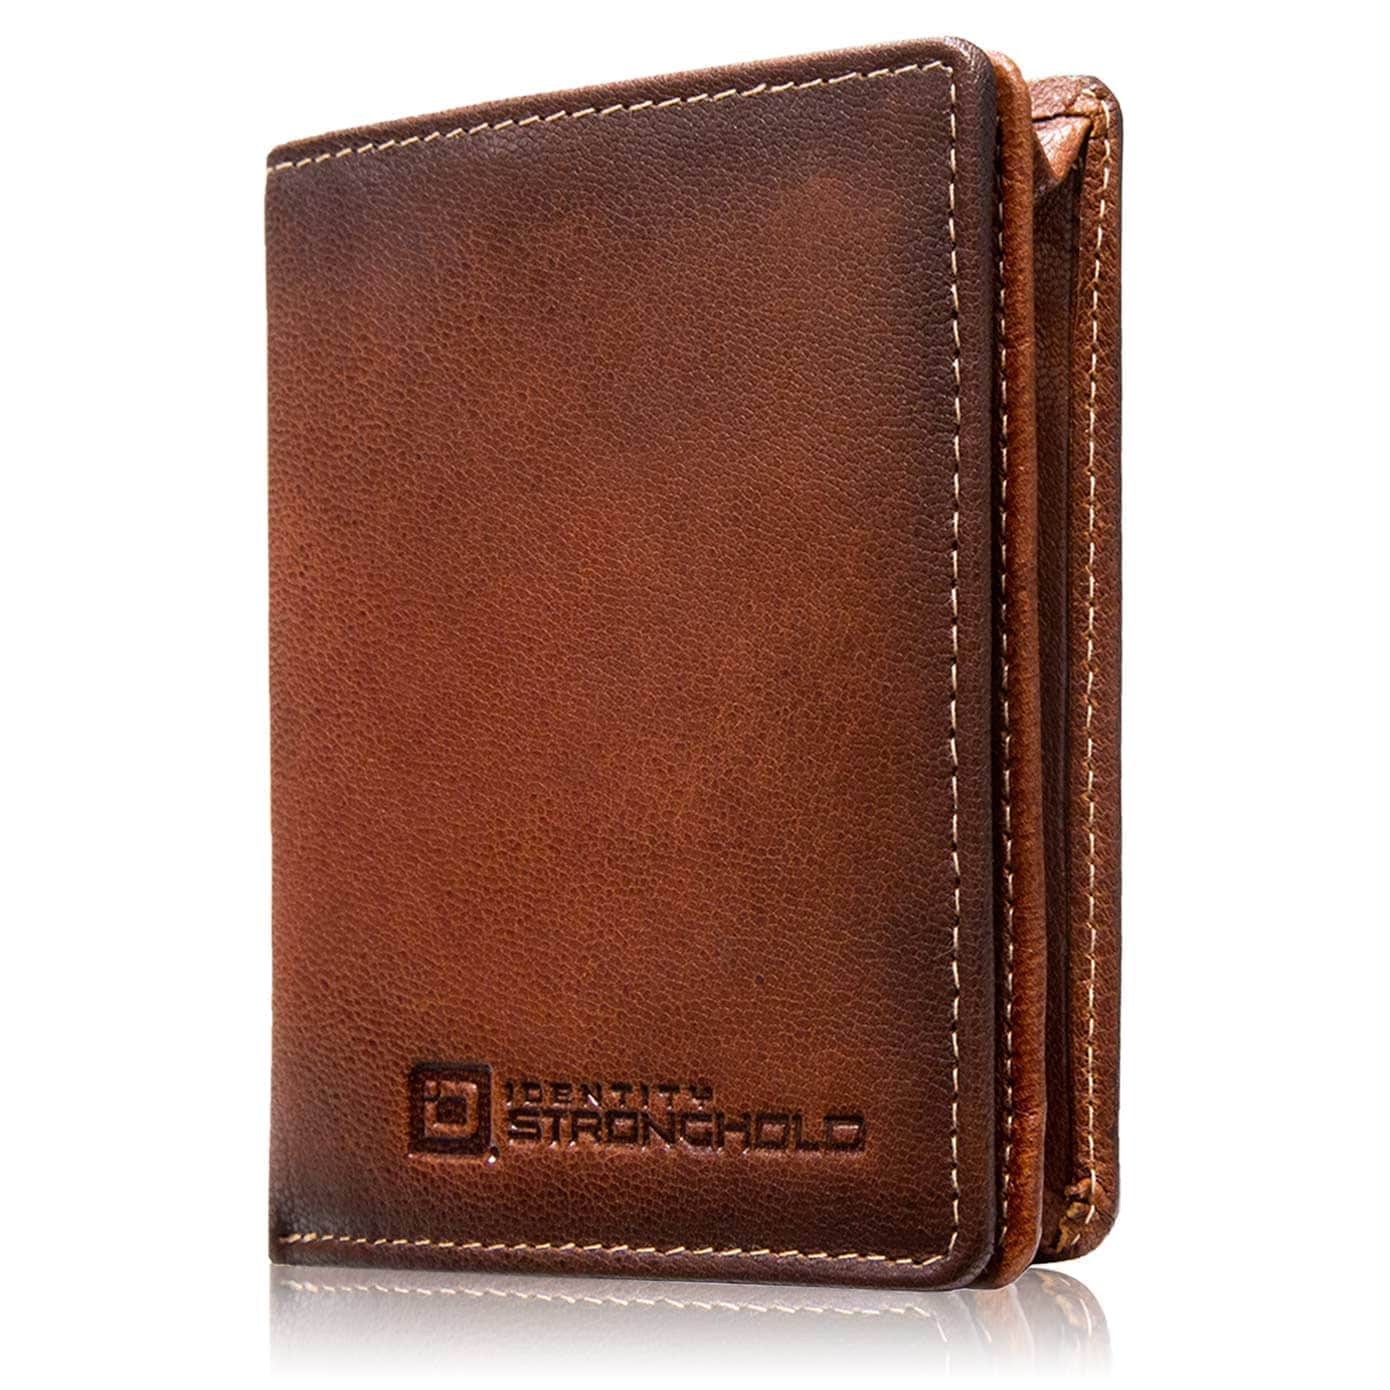 Max Leather Moneyclip Wallet